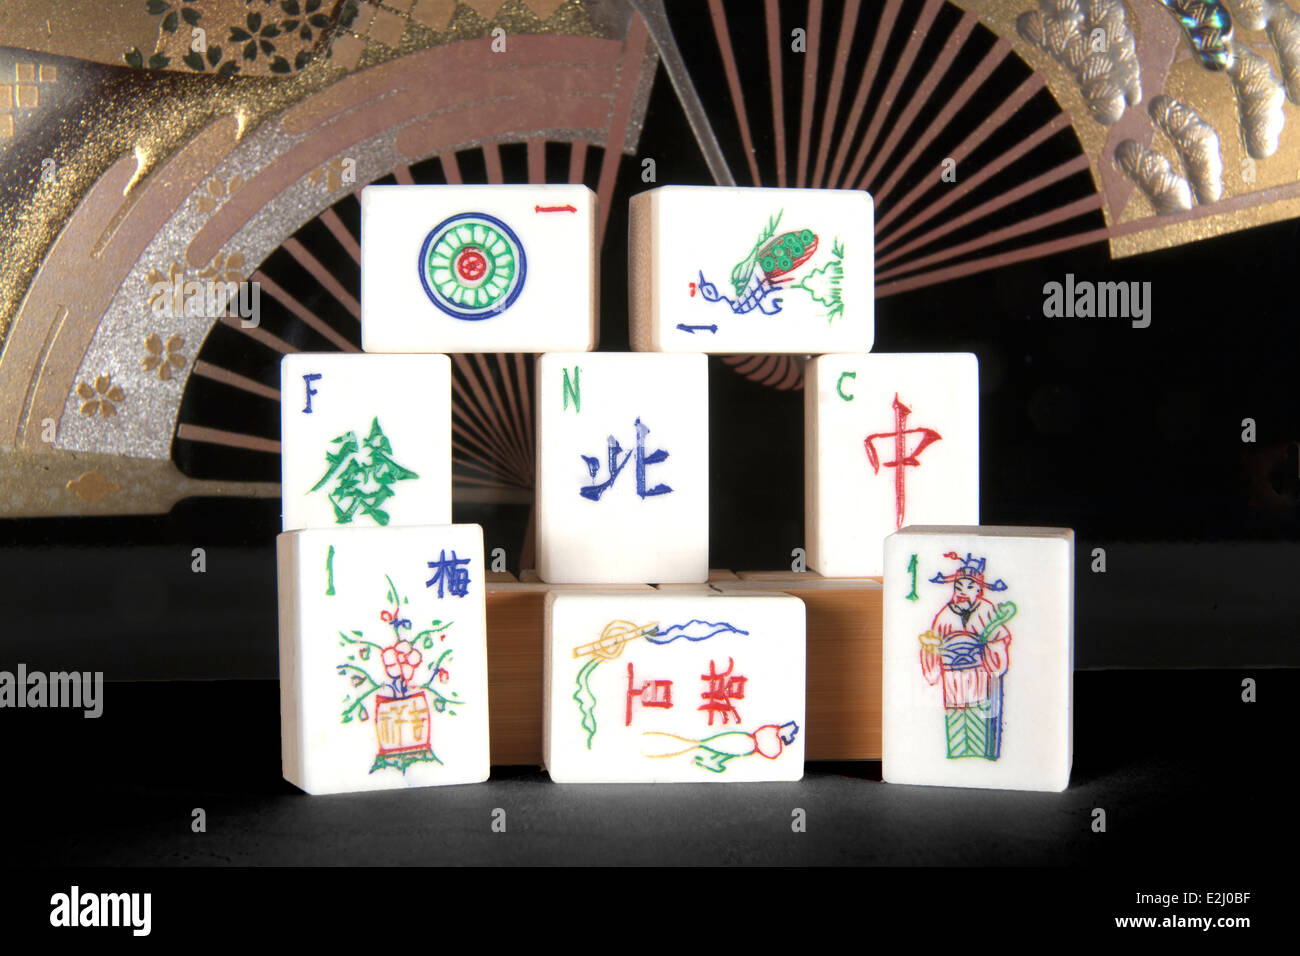 Fish bone maj jong tiles in traditional style in front of decorative fans Stock Photo